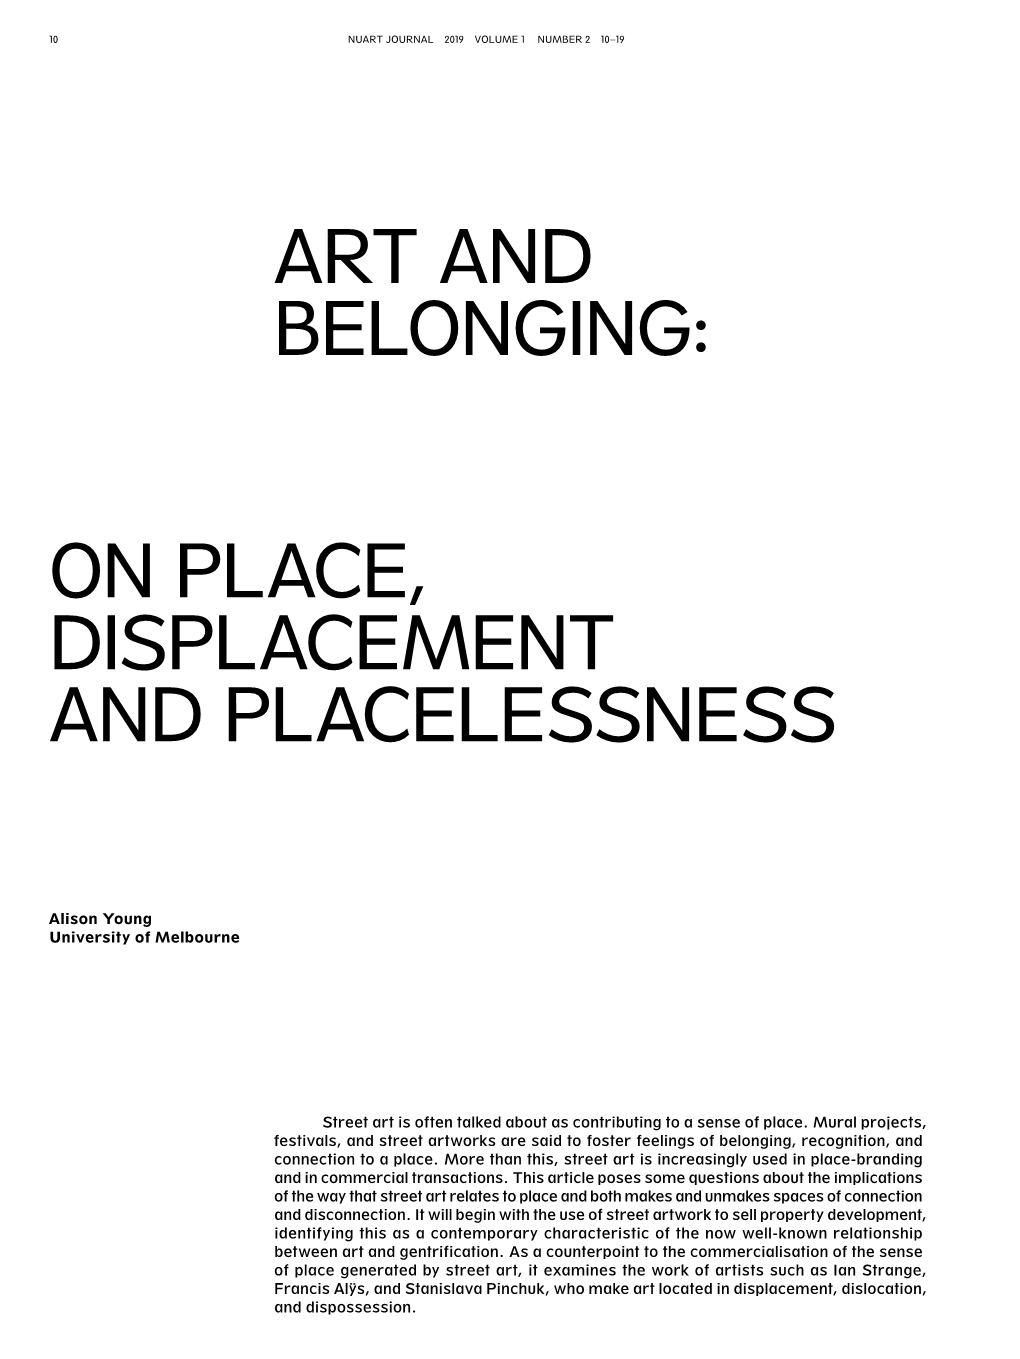 Alison Young Art and Belonging: on Place, Displacement And